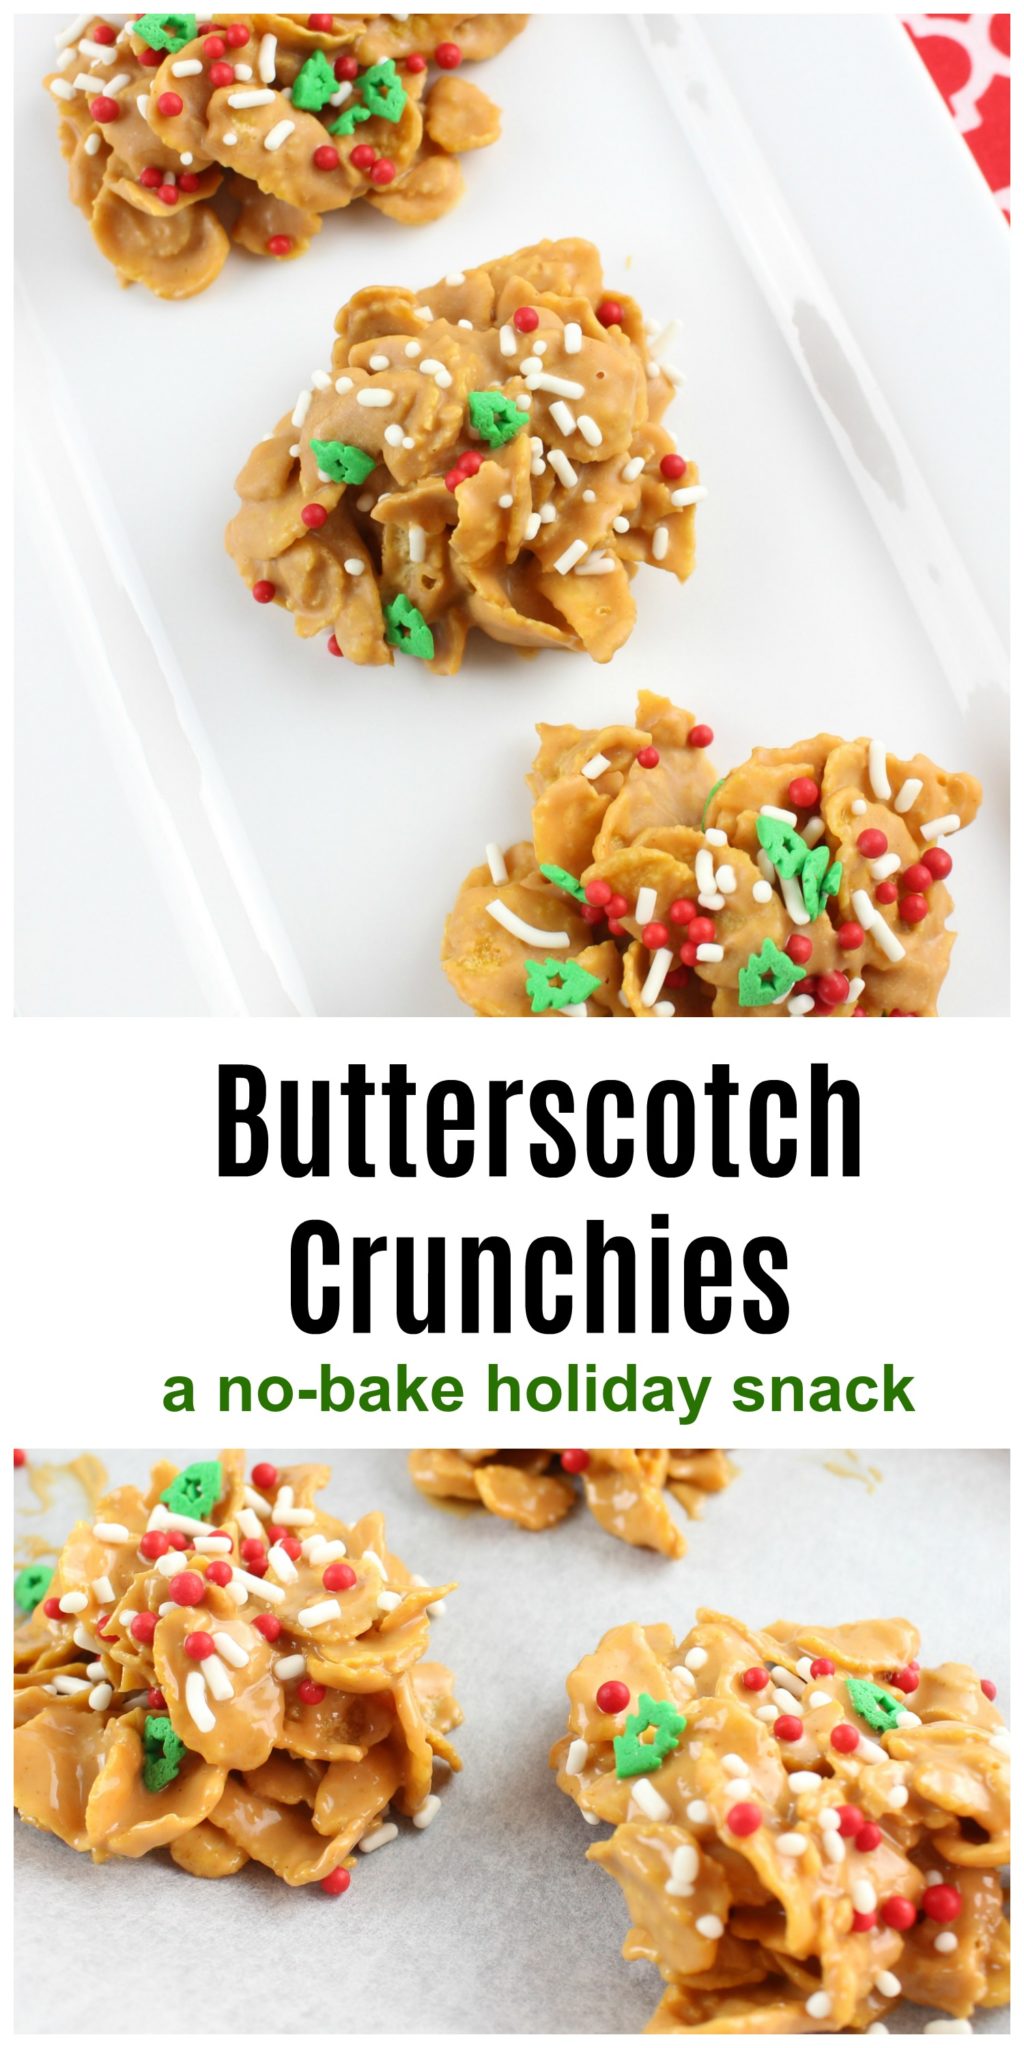 These no-bake butterscotch crunchies are a perfect holiday snack!